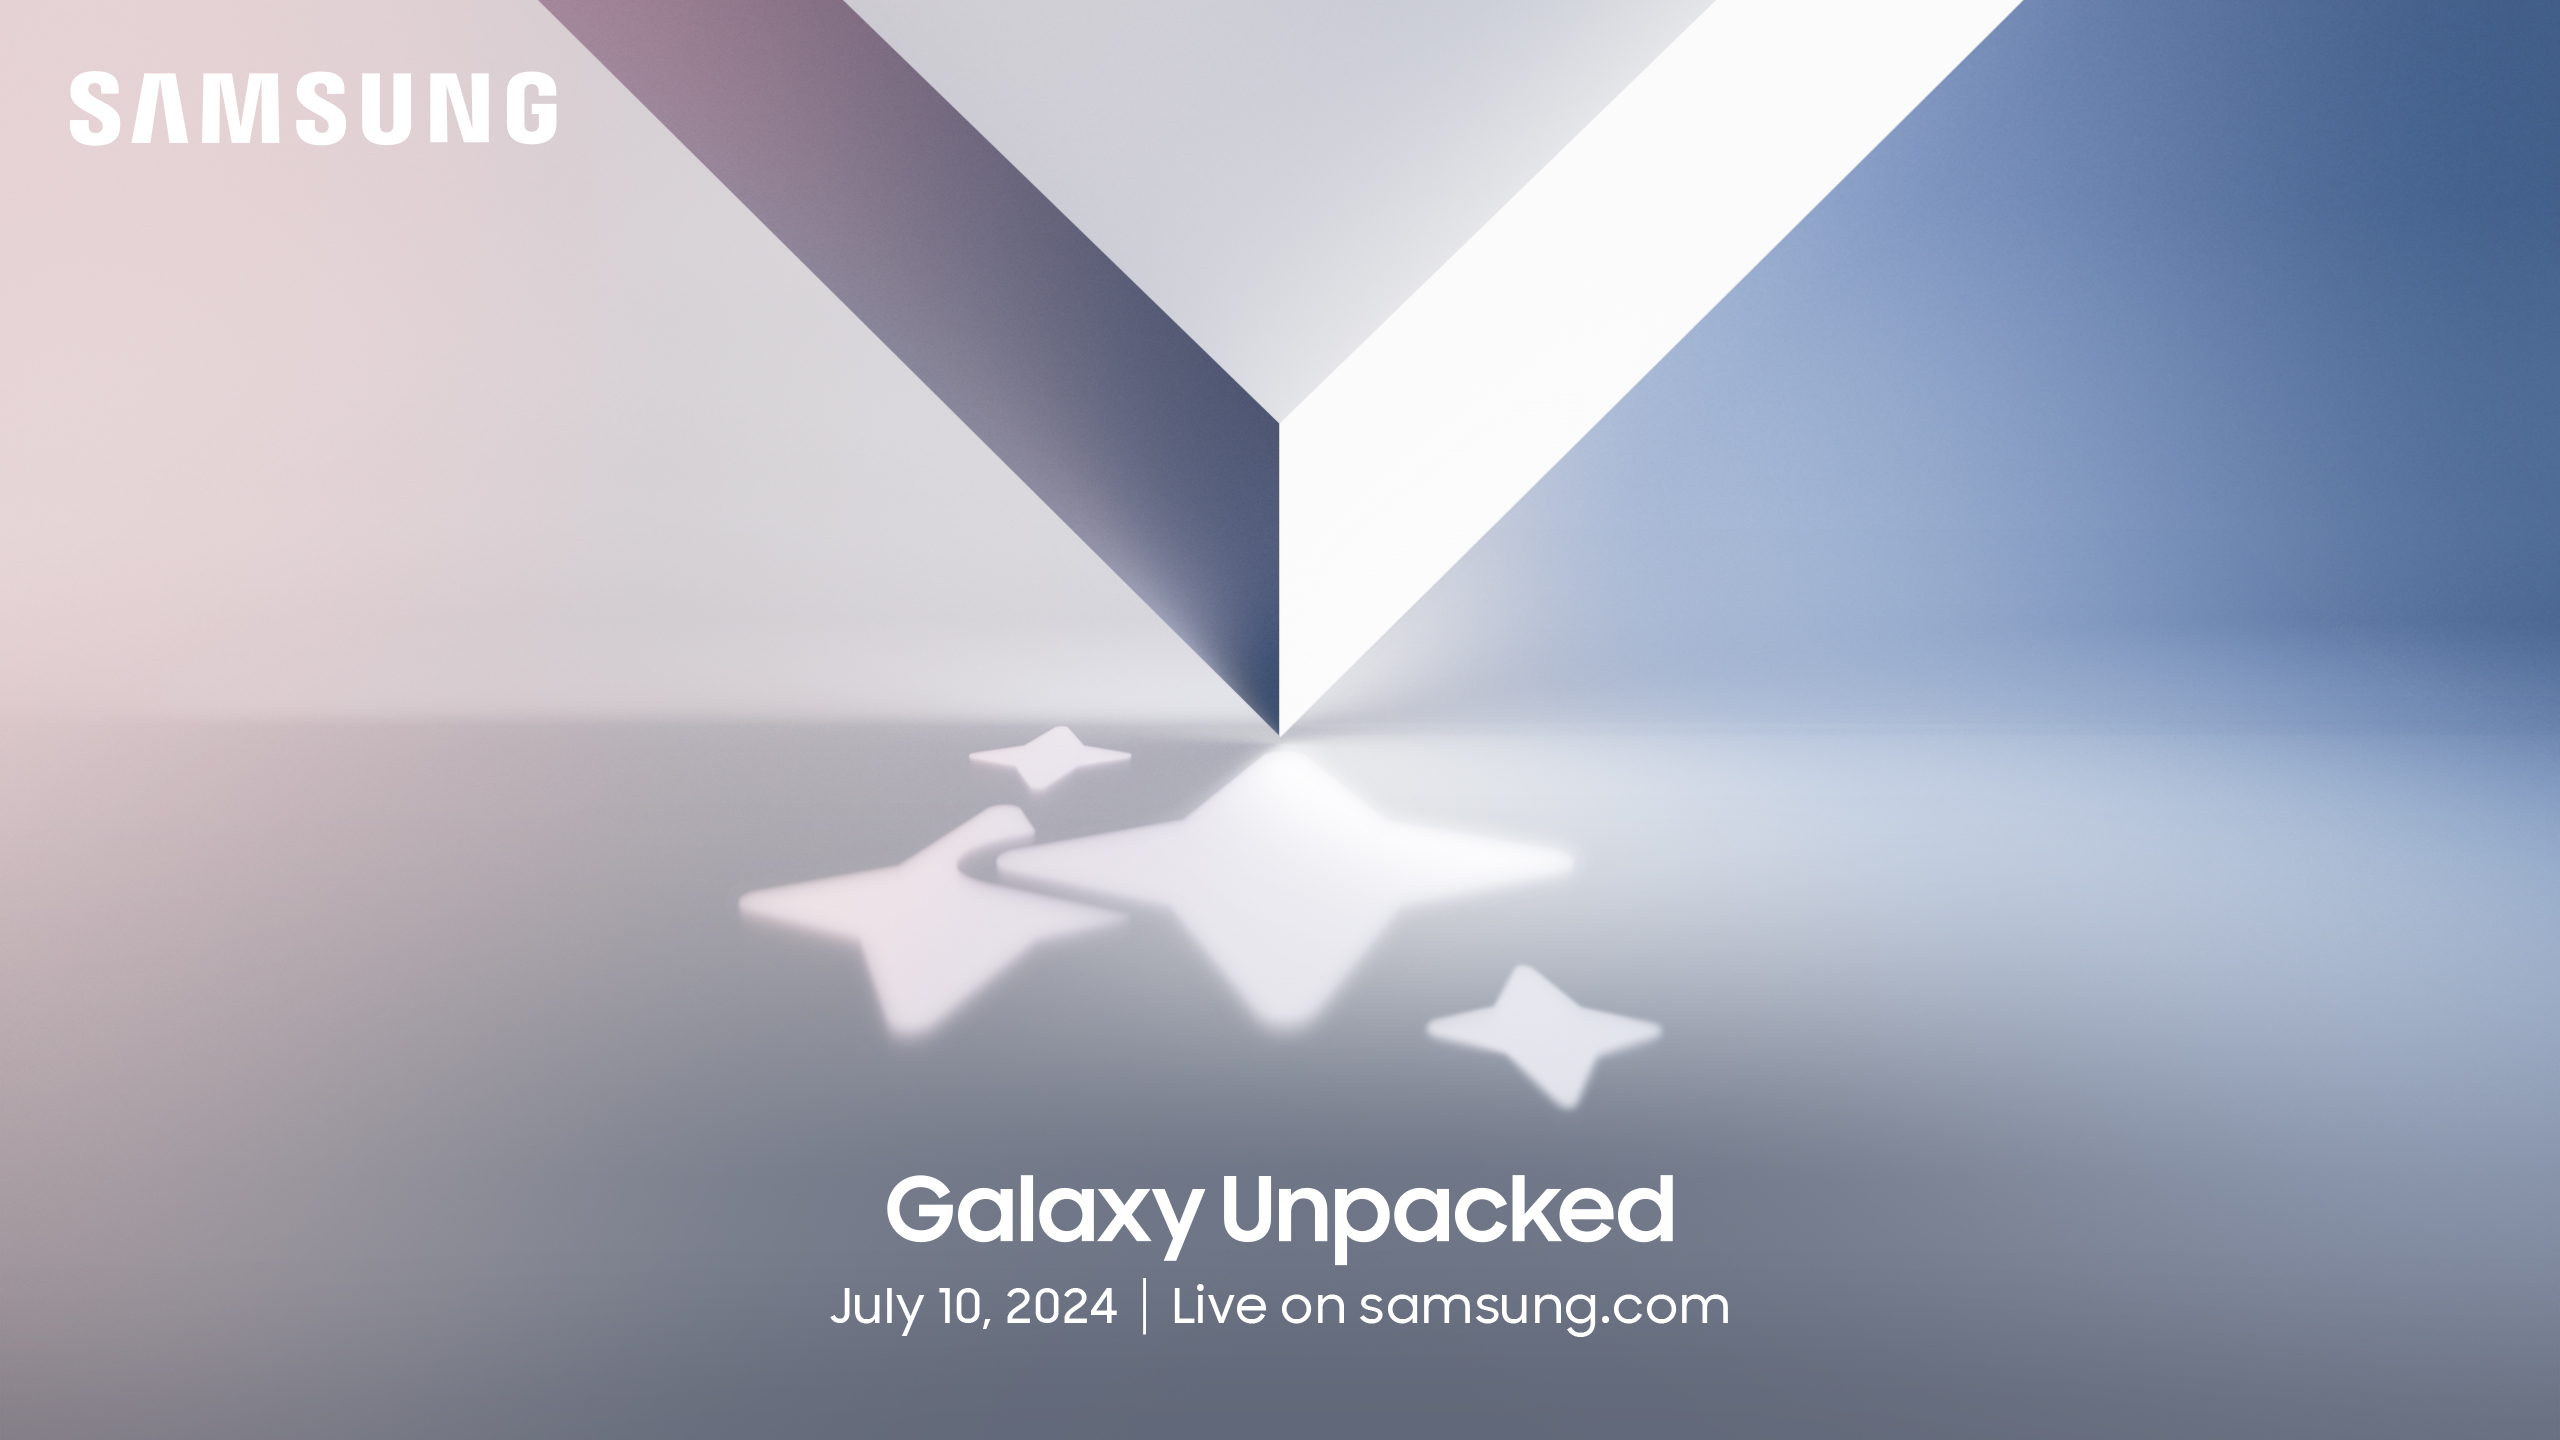 Teaser for Samsung Galaxy Unpacked July 2024.